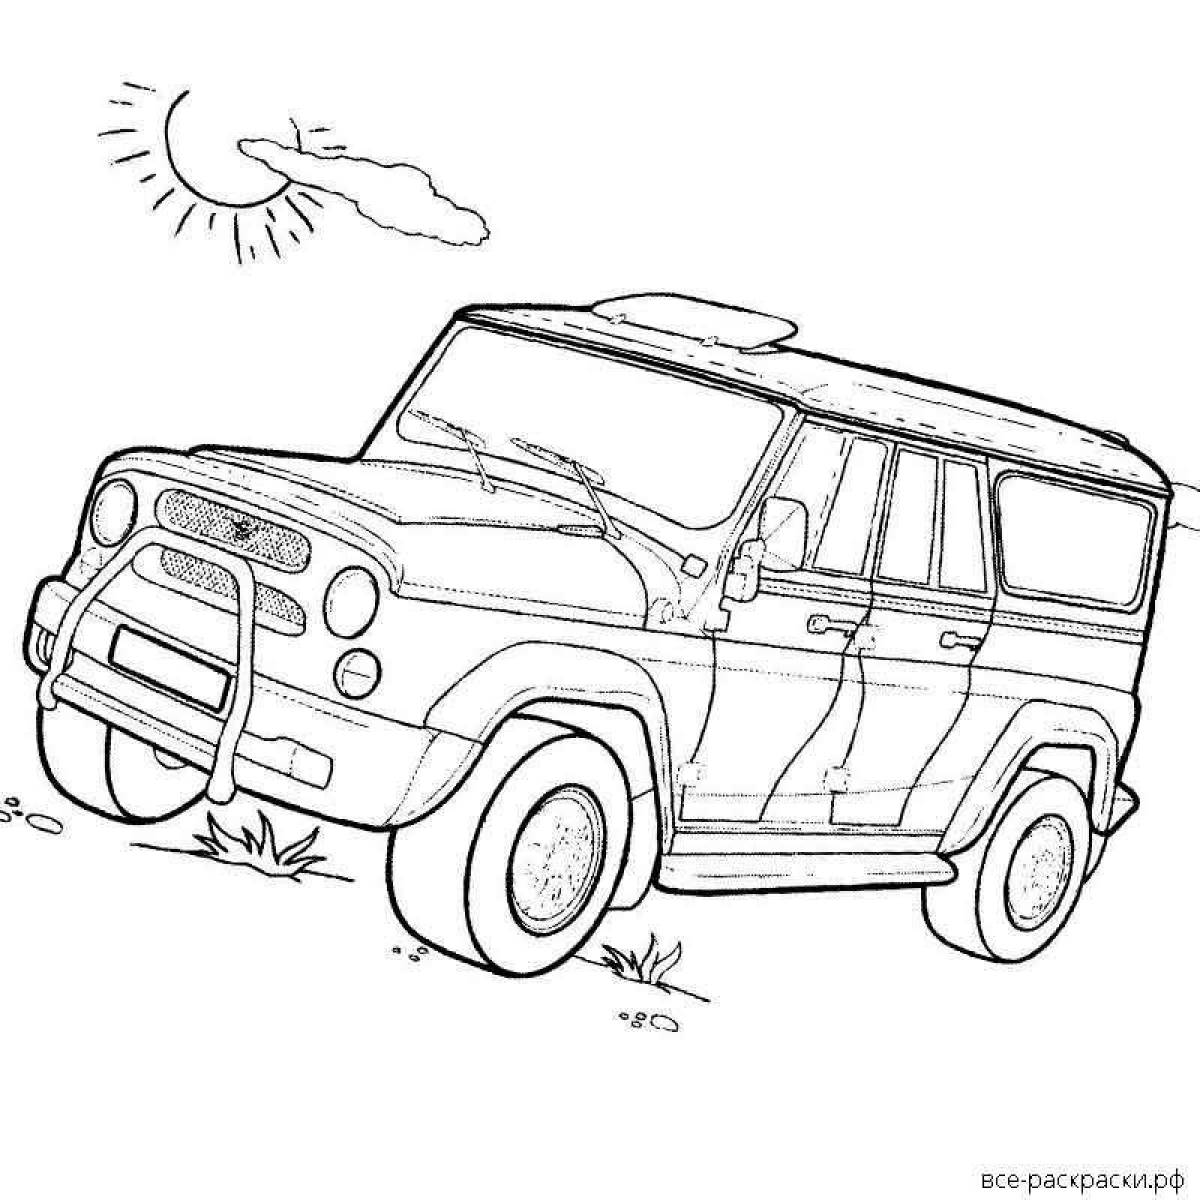 UAZ loaf bright coloring page